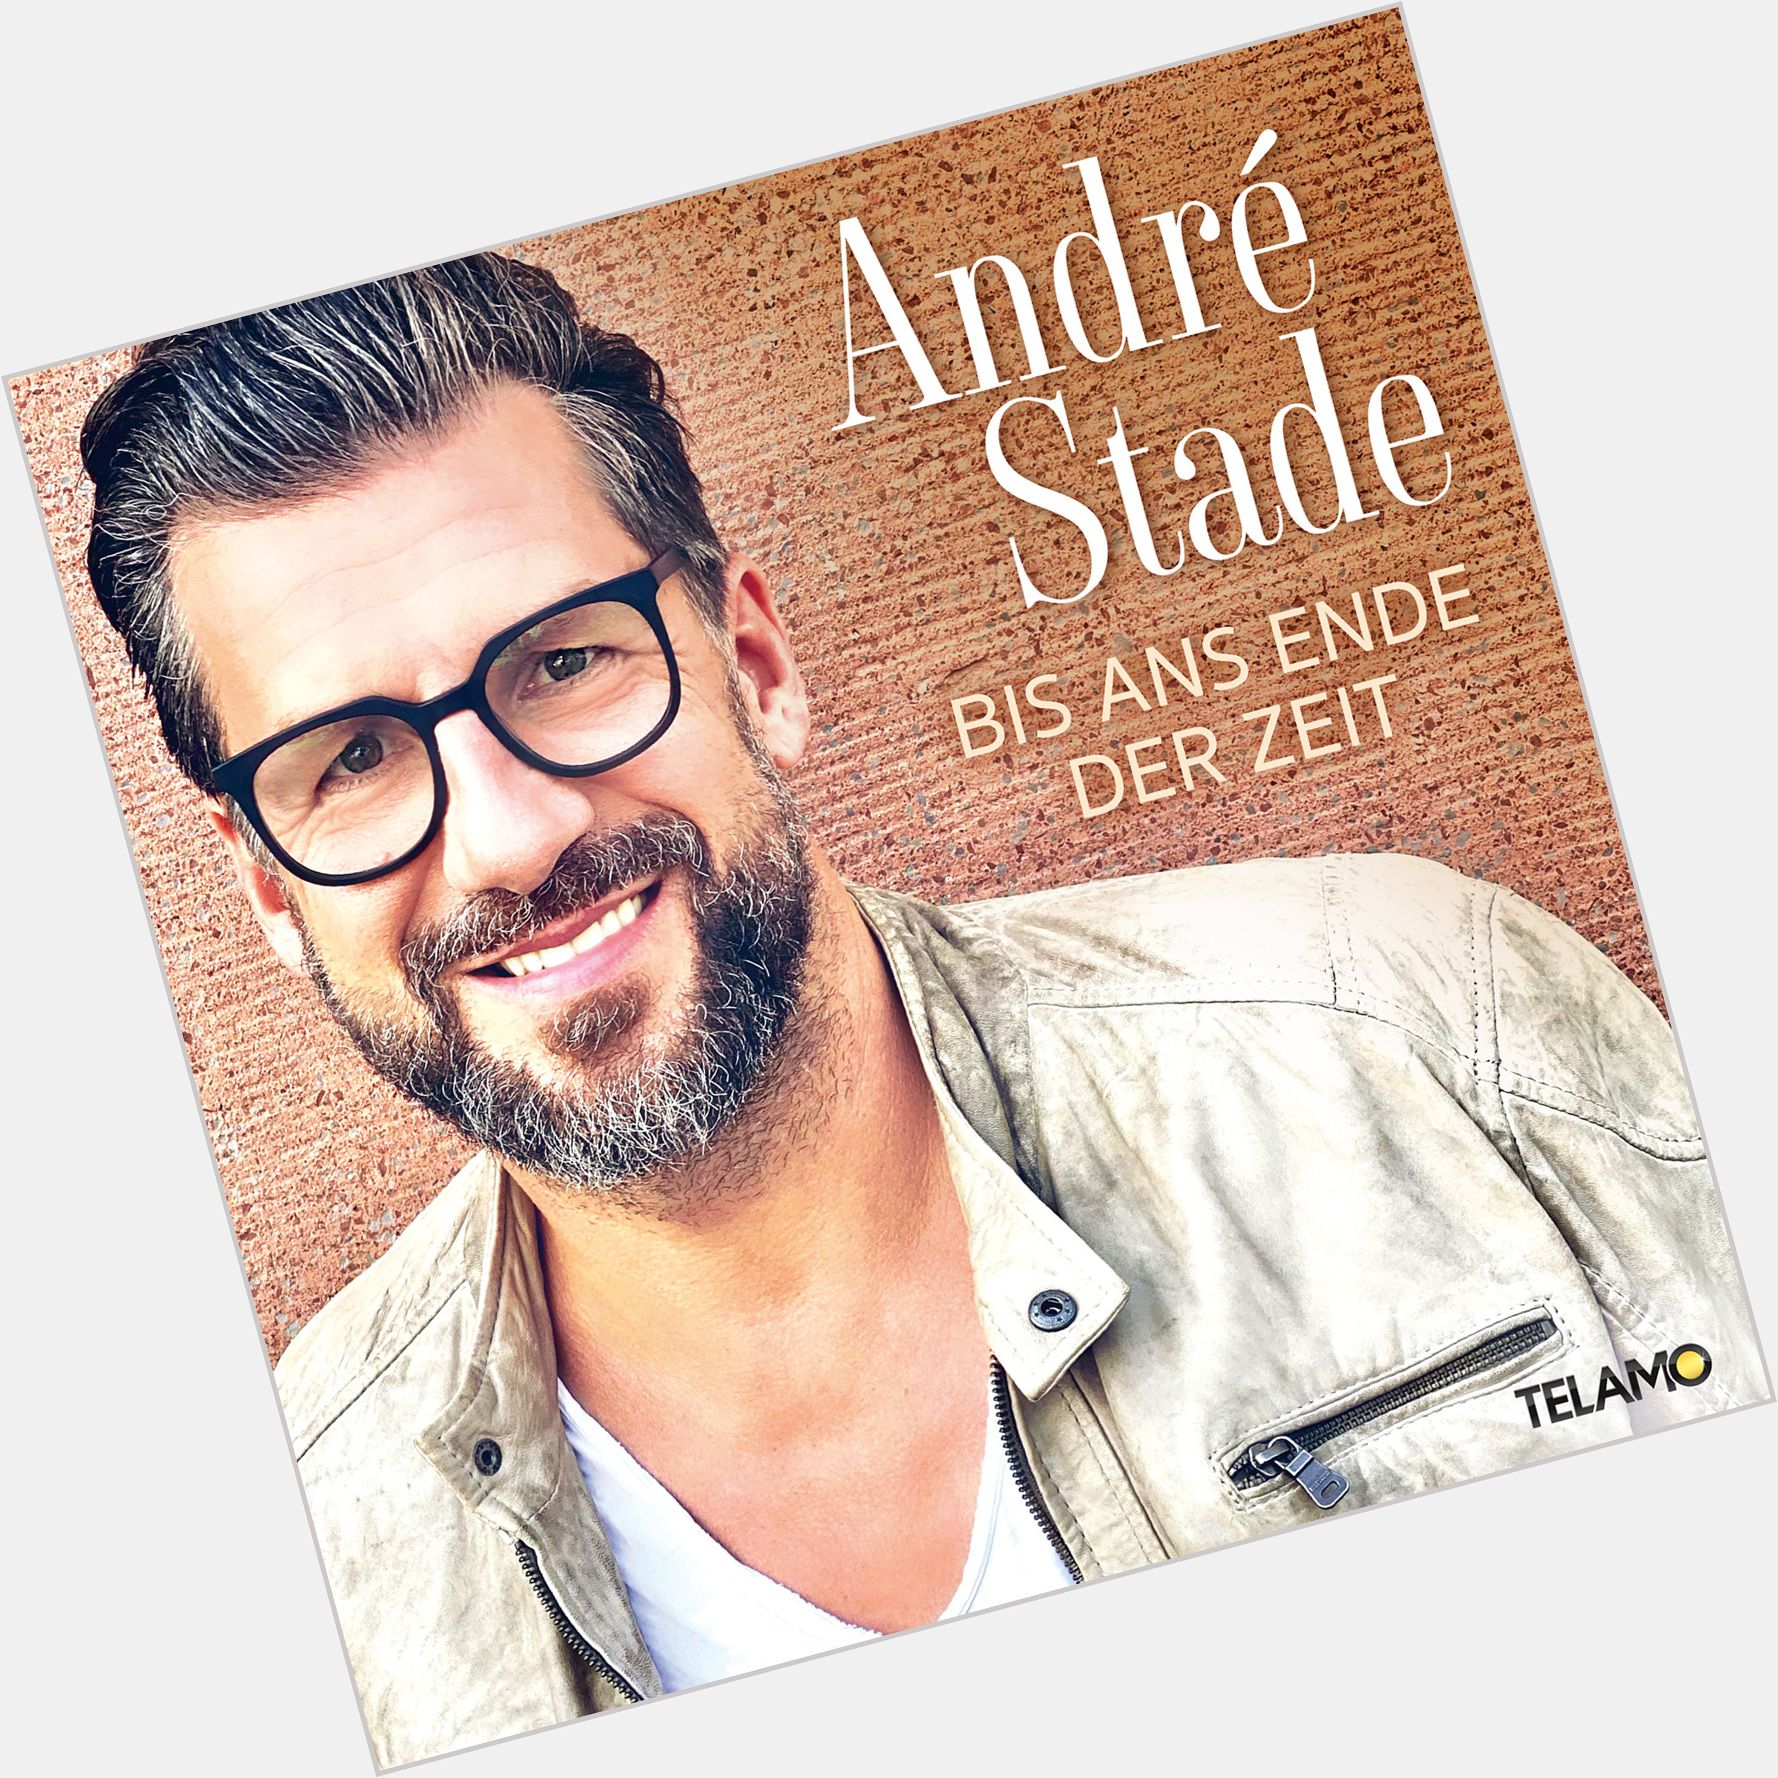 Andre Stade dating 2